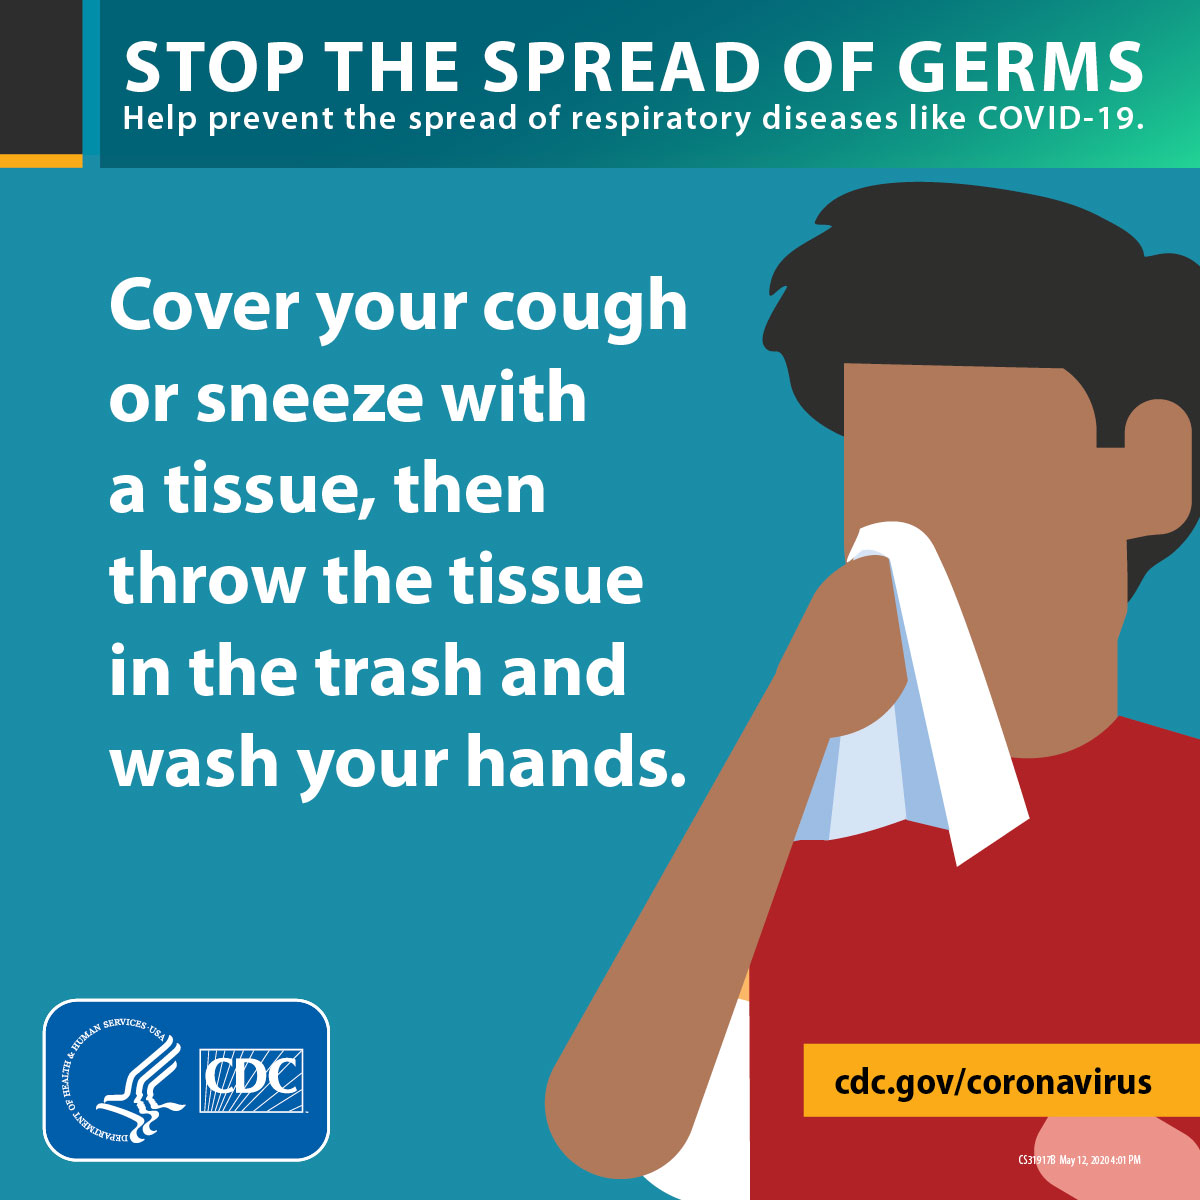 Picture of man holding tissue over nose with text 'Cover your cough or sneeze with a tissue, then throw the tissue in the trash and wash your hands'.